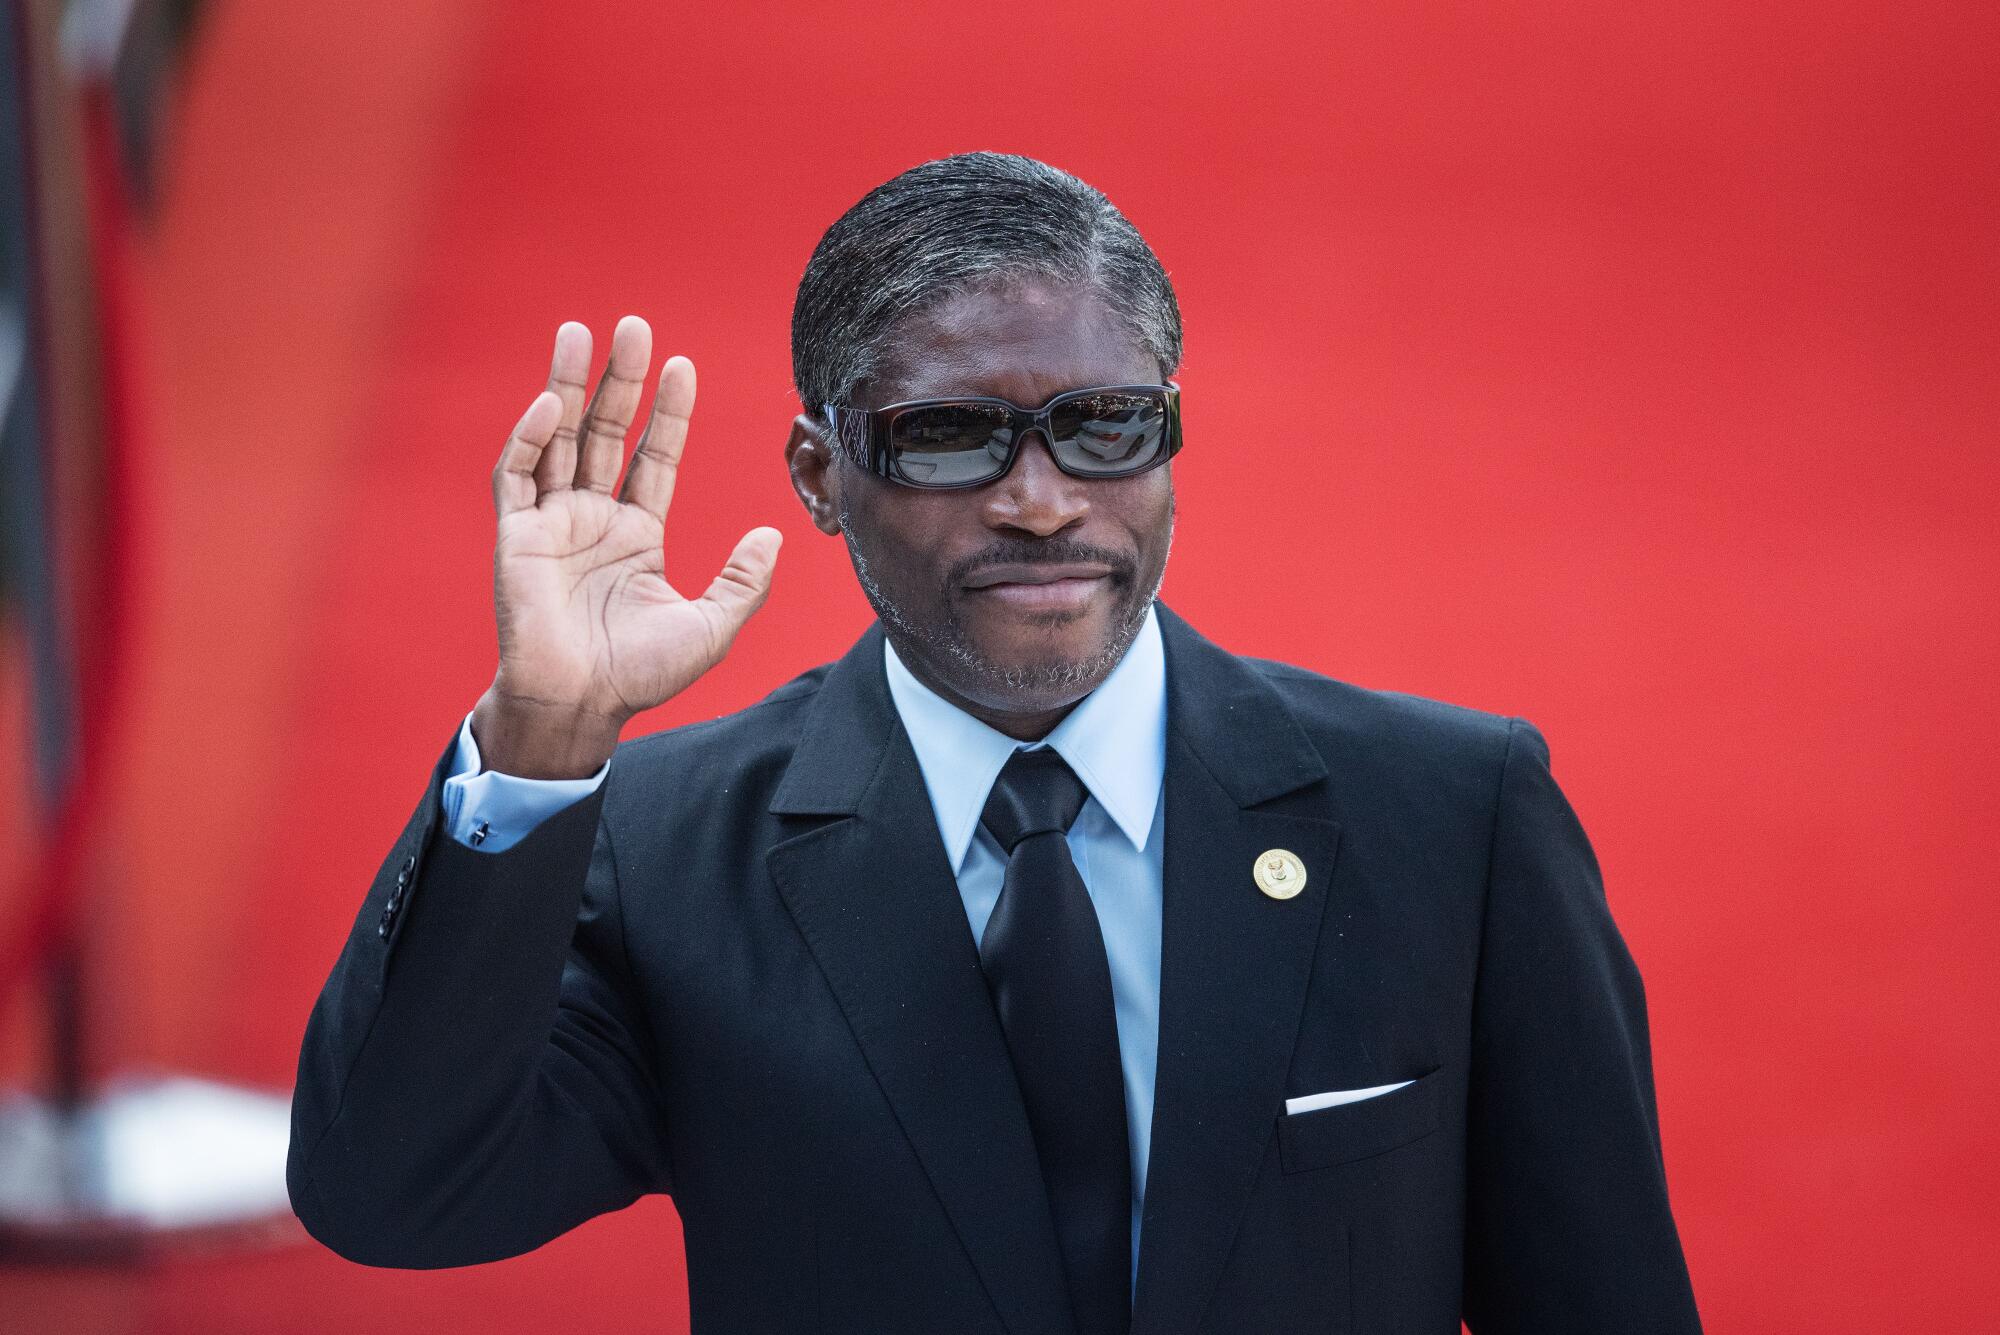 May 2019 photo of Vice President of Equatorial Guinea Teodoro Nguema Obiang Mangue in Pretoria, South Africa.